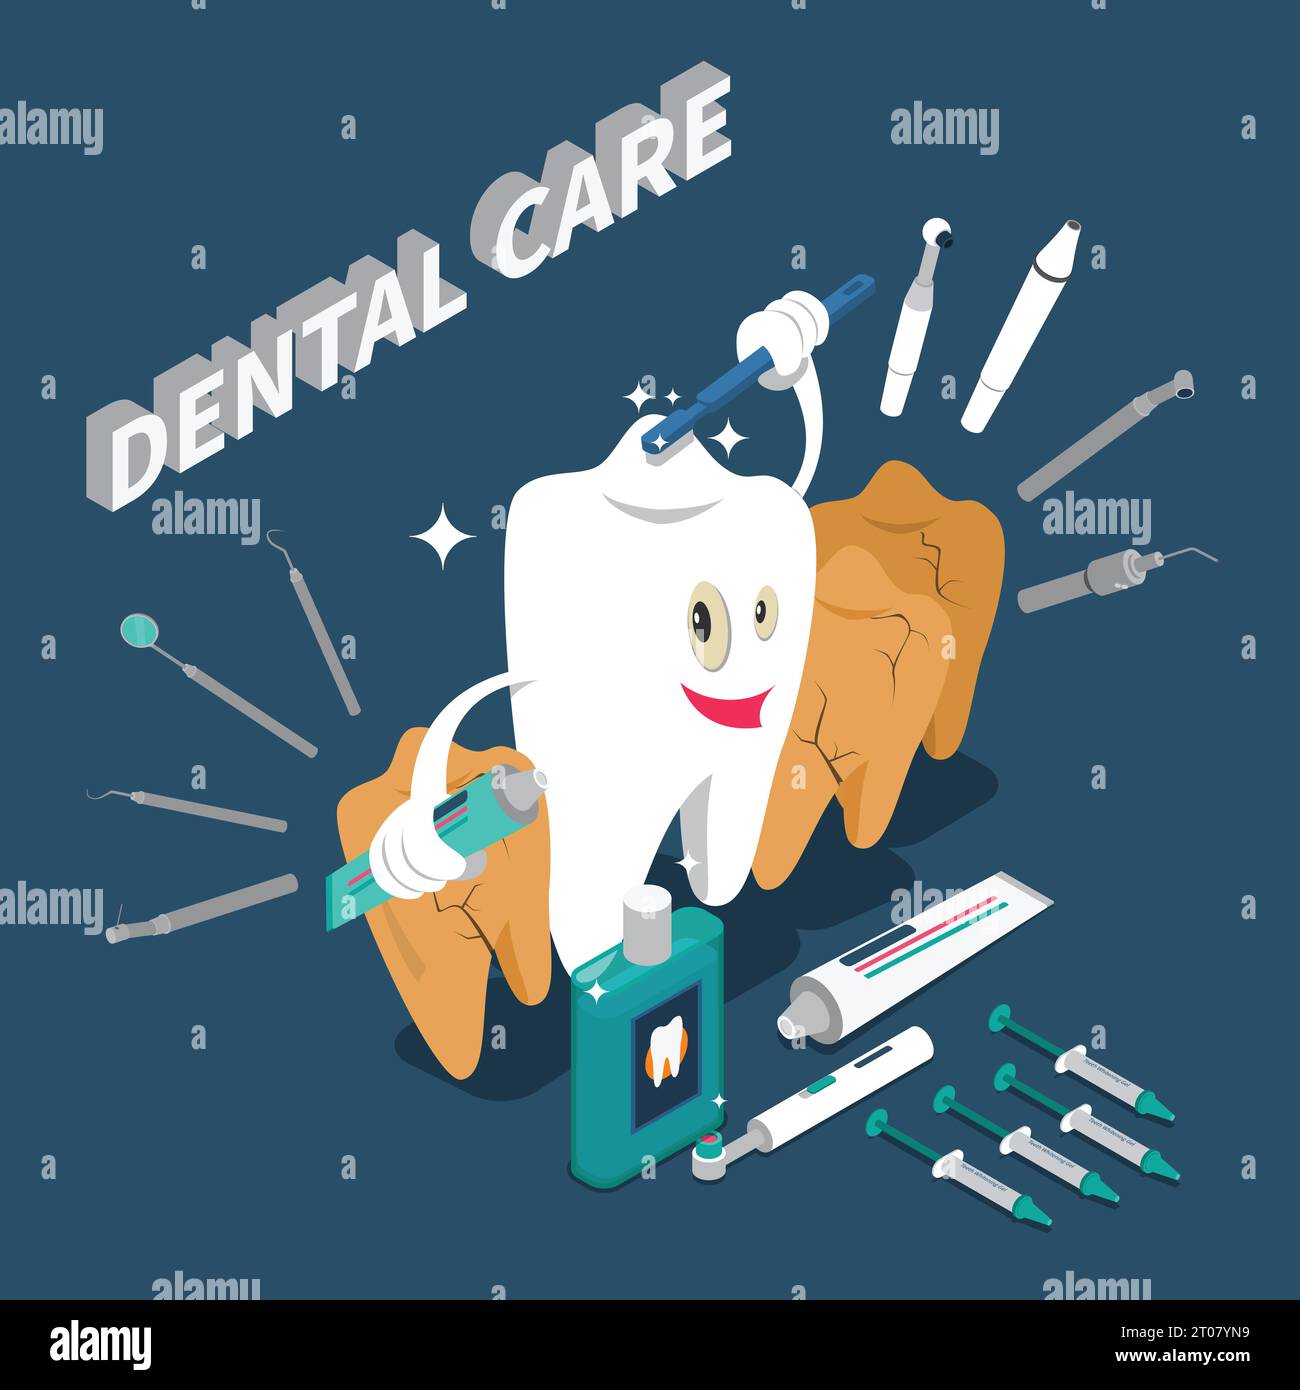 Dental care isometric concept with cartoon character in shape of tooth holding toothpaste and toothbrush vector illustration Stock Vector